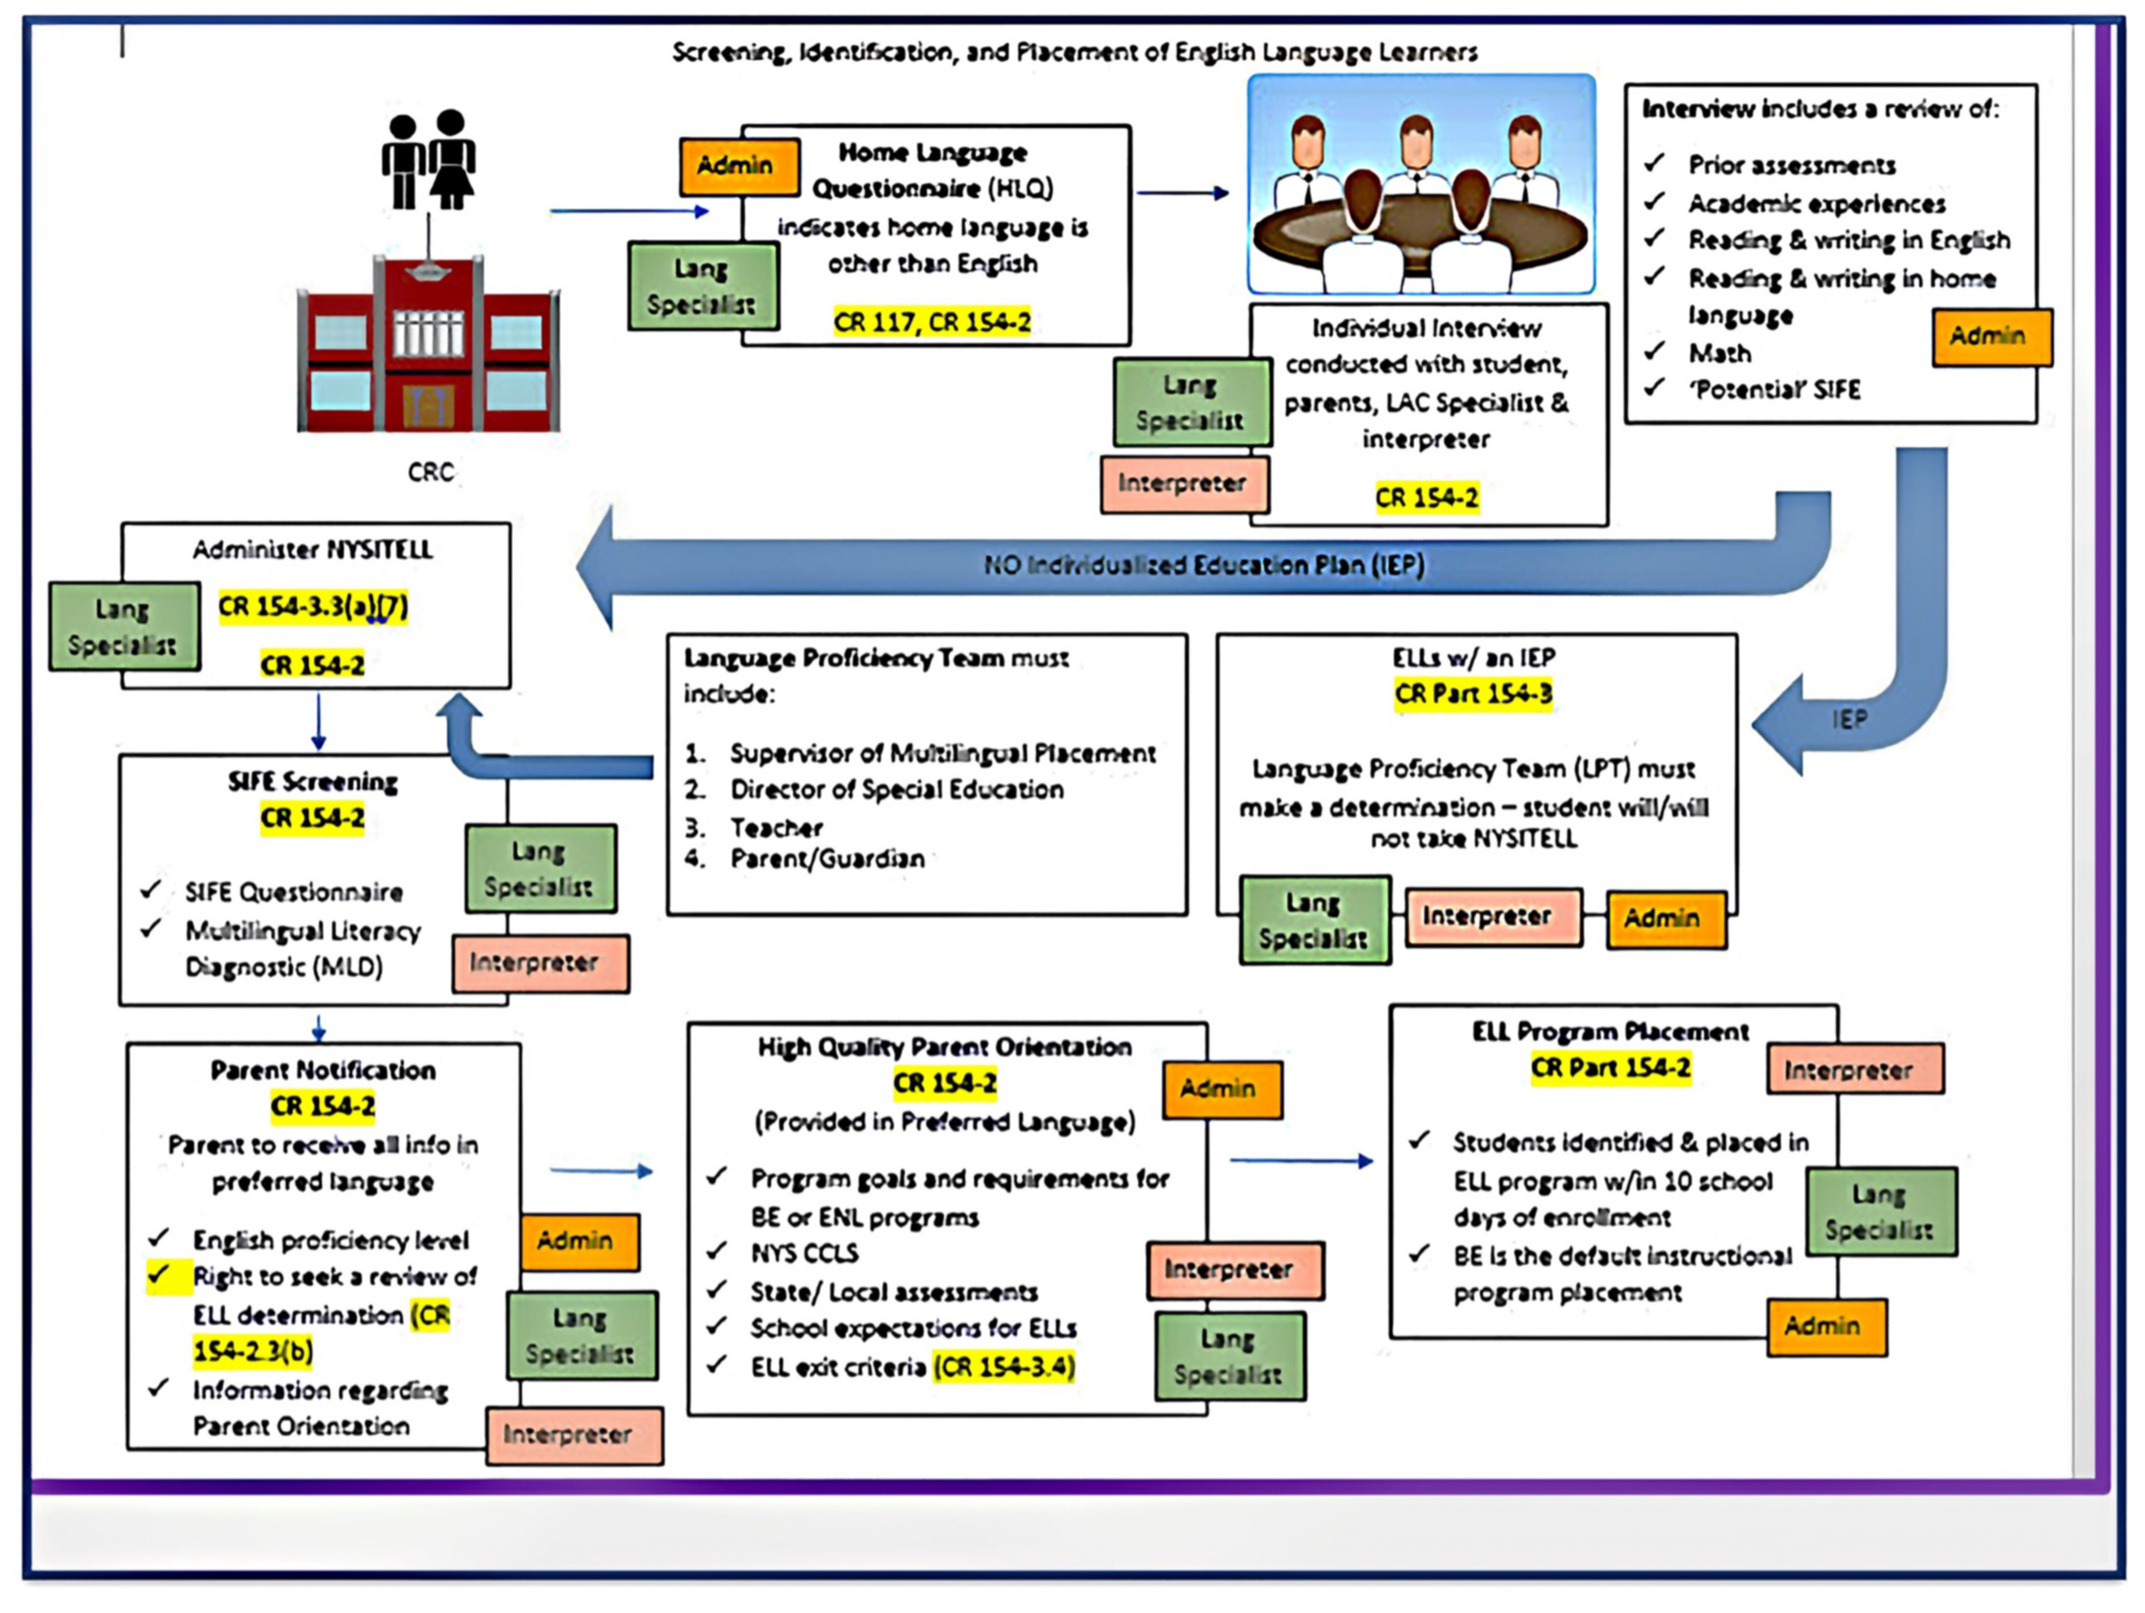  Flow chart- CRC Lang Specialist Administer NYSITELL CR 154-3.3(ǝ}{7) CR 154-2 SIFE Screening CR 154-2 Screening, Identification, and Placement of English Language Learners Admin Home Language Questionnaire (HLQ) indicates home language is Interview includes a review of: ✓ Prior assessments ✓ Academic experiences ✓ Reading & Writing in English ✓ Reading & writing in home language ✓ Math Admin Potential SIFE Lang Specialist other than English CR 117, CR 154-2 Lang Specialist Individual Intensew conducted with student, parents, LAC Specialist & interpreter ✓ Interpreter CR 154-2 NO Individualized Education Plan (IEP) ELLs w/ an IEP Language Proficiency Team must include: 1. Supervisor of Multilingual Placement 2. Director of Special Education CR Part 154-3 Language Proficiency Team (LPT) must make a determination - student will/will not take NYSITELL IEP 3. Teacher Lang 4. Parent/Guardian SIFE Questionnaire Specialist ✓Multilingual Literacy Diagnostic (MLD) Interpreter High Quality Parent Orientation Parent Notification Parent to receive all info in preferred language ✓ English proficiency level Right to seek a review of Lang Specialist Interpreter Admin ELL Program Placement CR Part 154-2 Interpreter CR 154-2 Admin CR 154-2 (Provided in Preferred Language) Program goals and requirements for Admin BE or ENL programs ✓ NYS CCLS ✓ Interpreter State/Local assessments ELL determination (CR 154-2.3(b) Lang Specialist ✓ School expectations for ELLS ✓ELL exit criteria (CR 154-3.4) Information regarding Lang Specialist Parent Orientation Interpreter Students identified & placed in ELL program w/in 10 school days of enrollment BE is the default instructional program placement Lang Specialist Admin